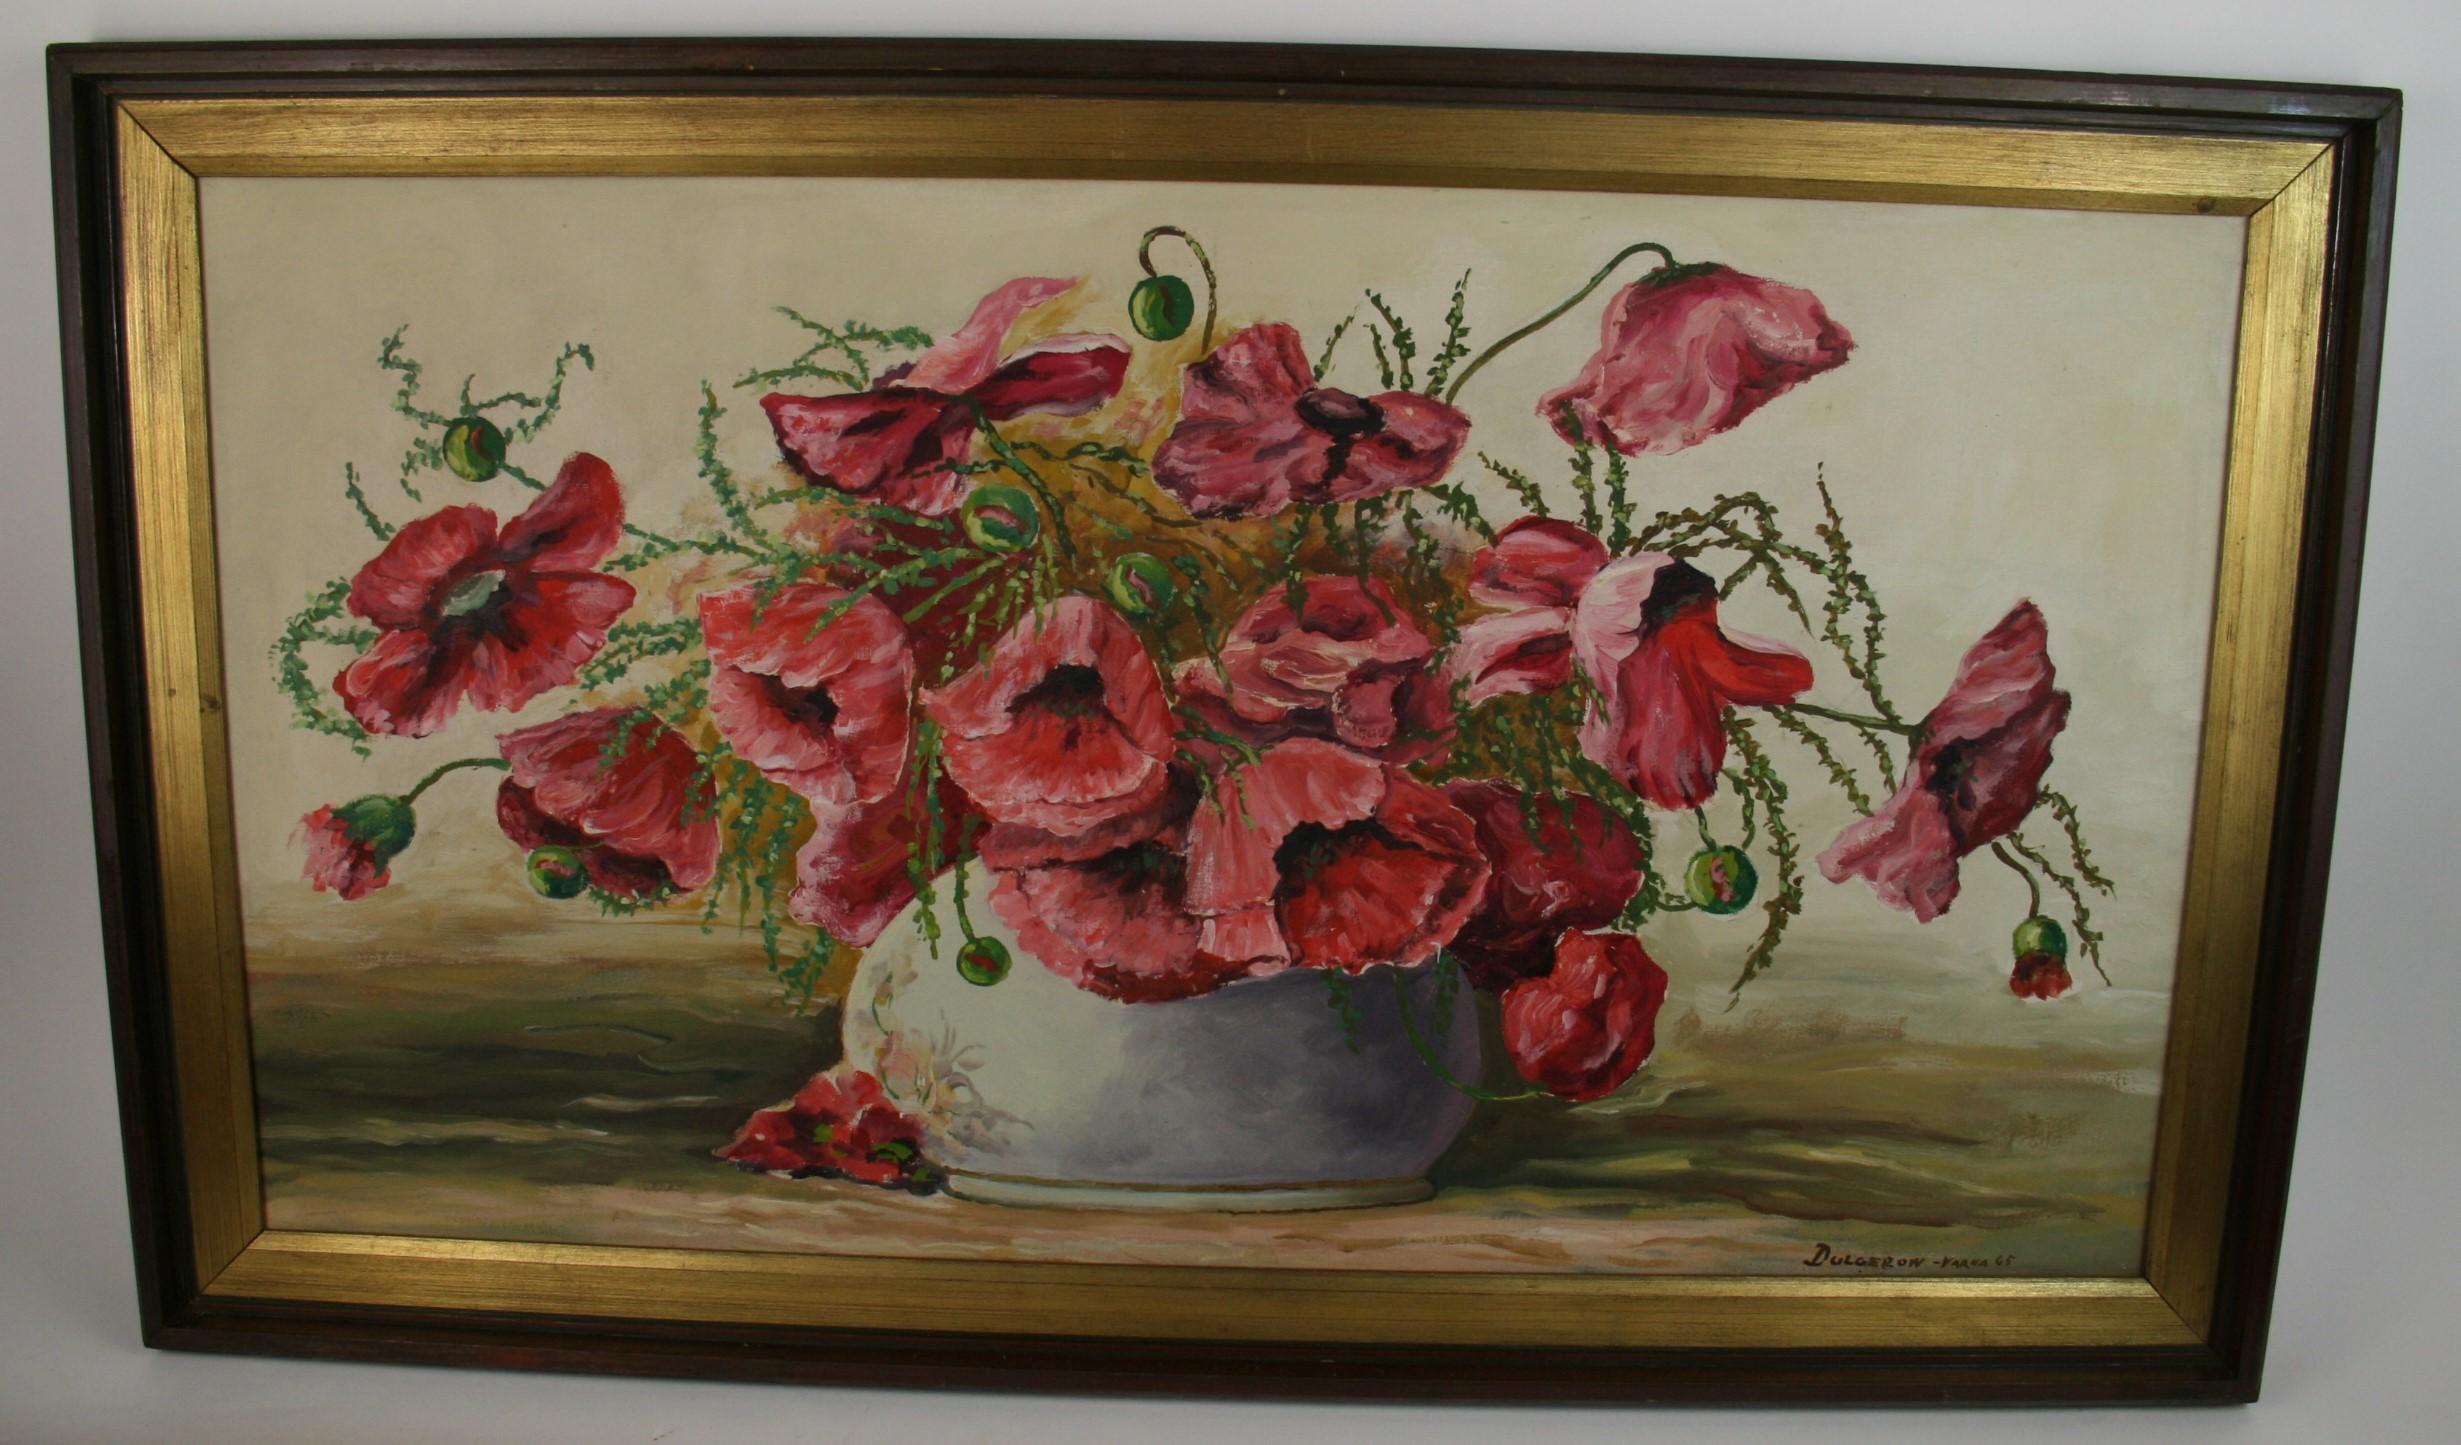 Varna Dulgerow Landscape Painting - American Impressionist Oversized Bouquet of Poppies Still life Floral painting